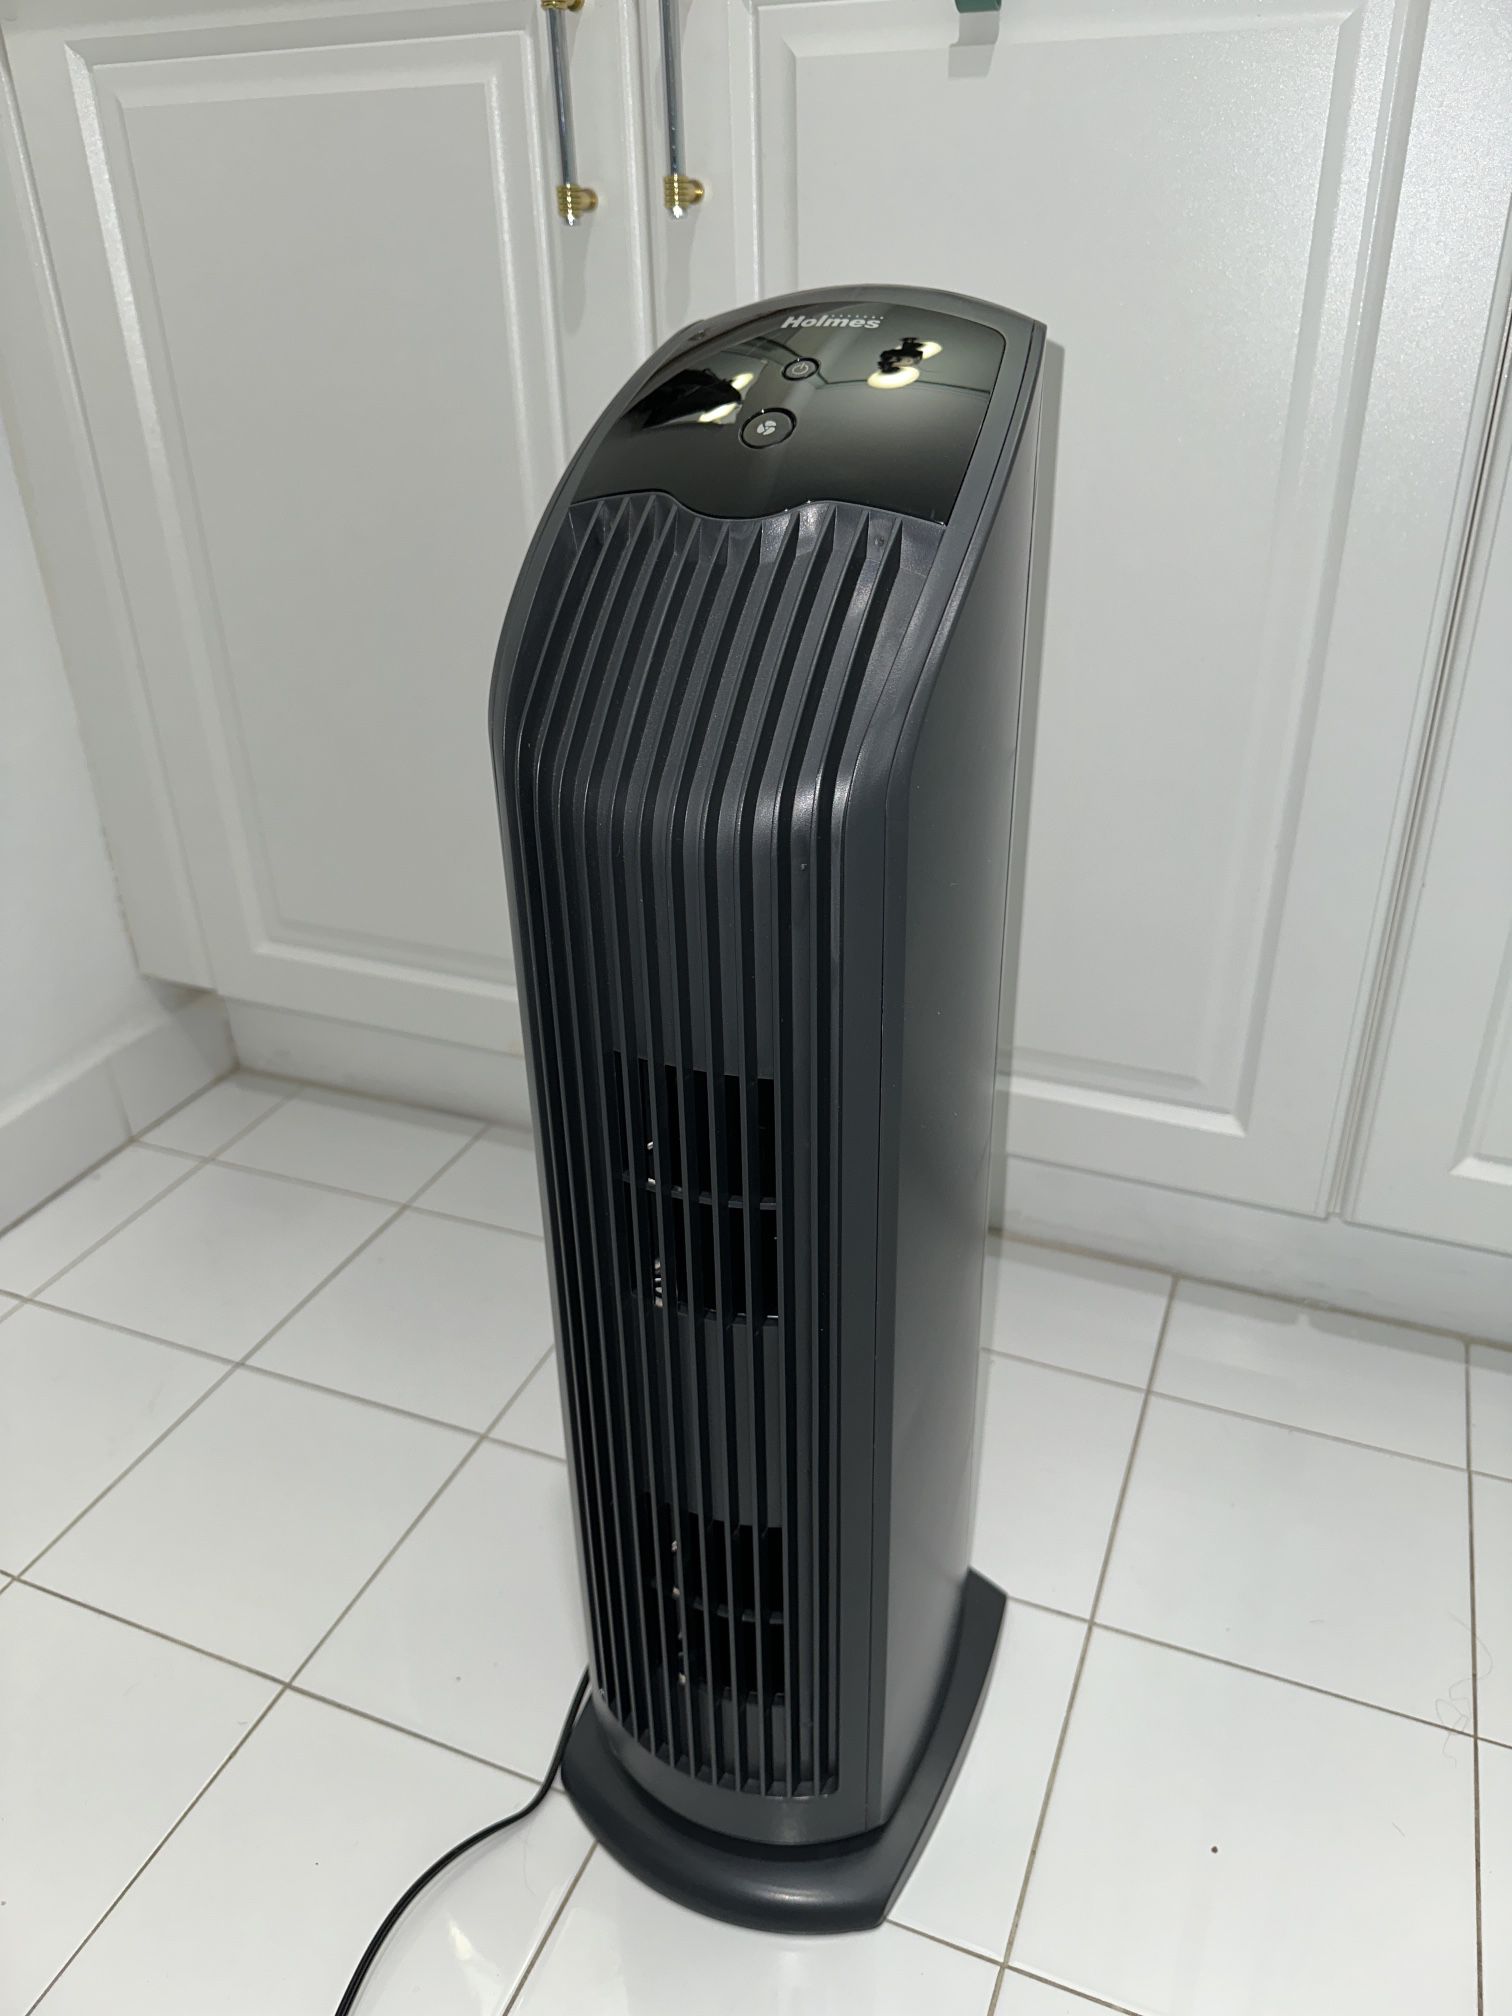 AIR PURIFIER - must leave now!!! (Holmes tower)